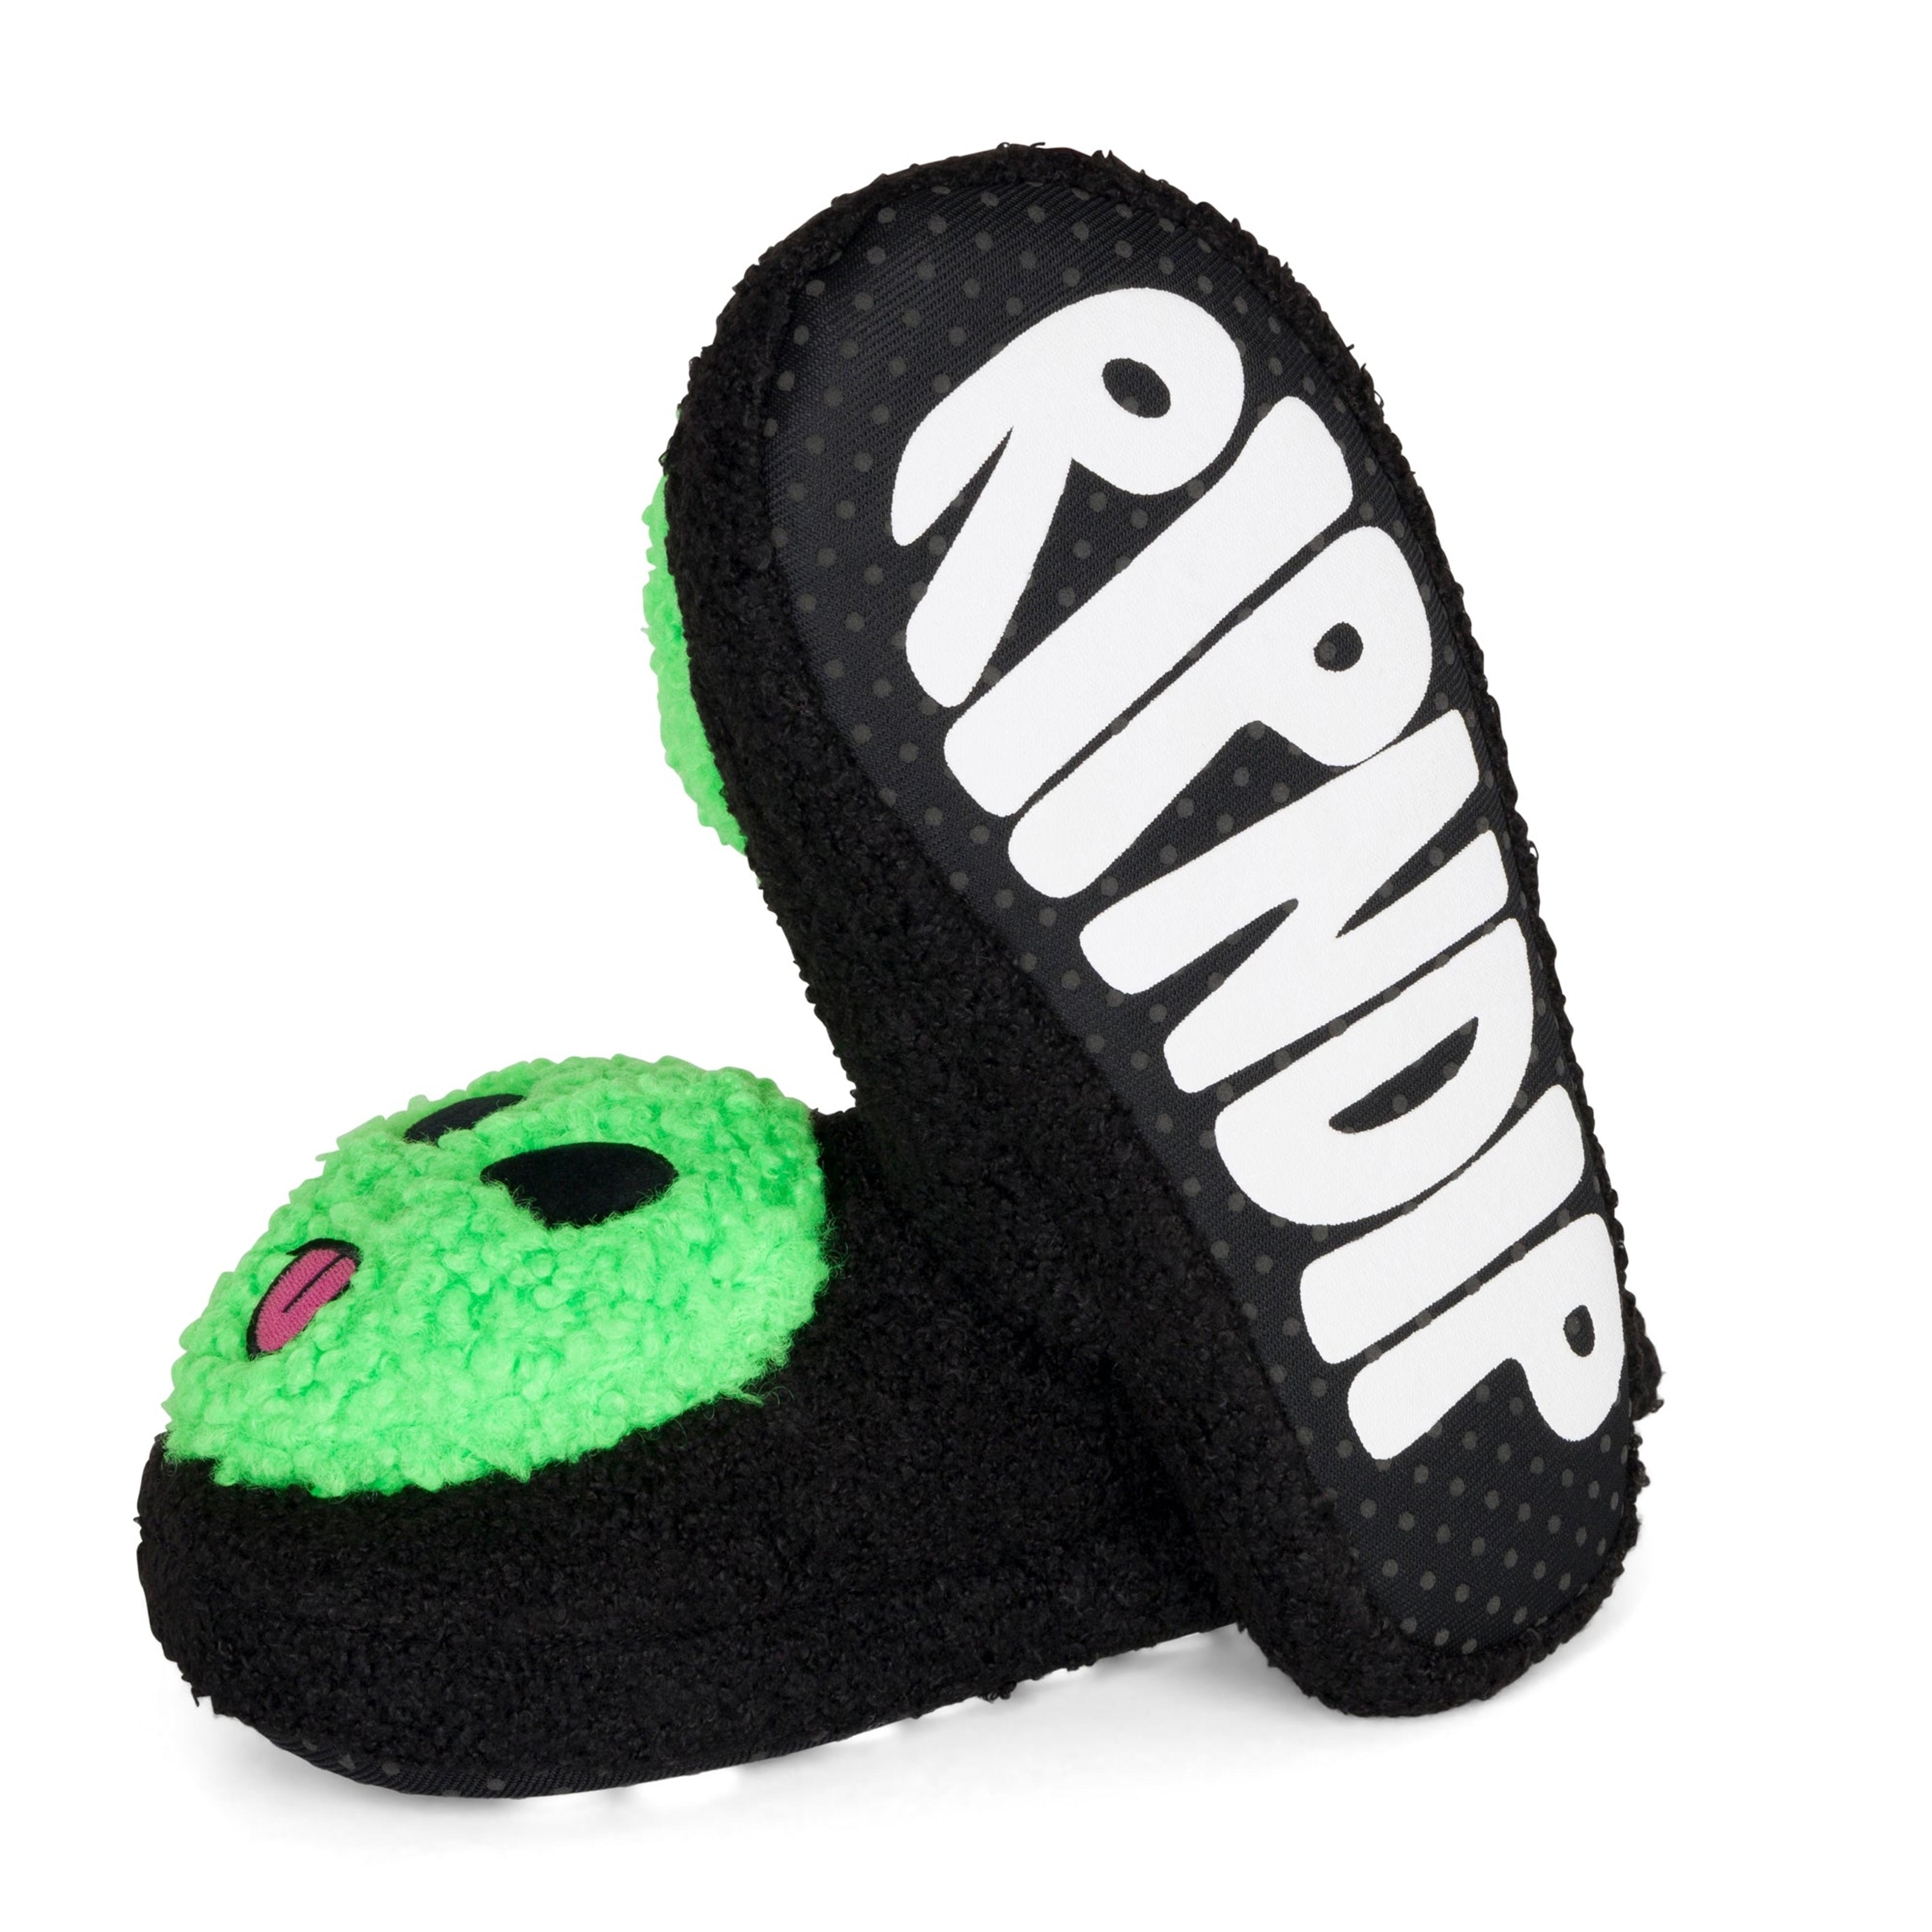 Alternate View 3 of Lord Alien Plush Face House Slippers (Black)